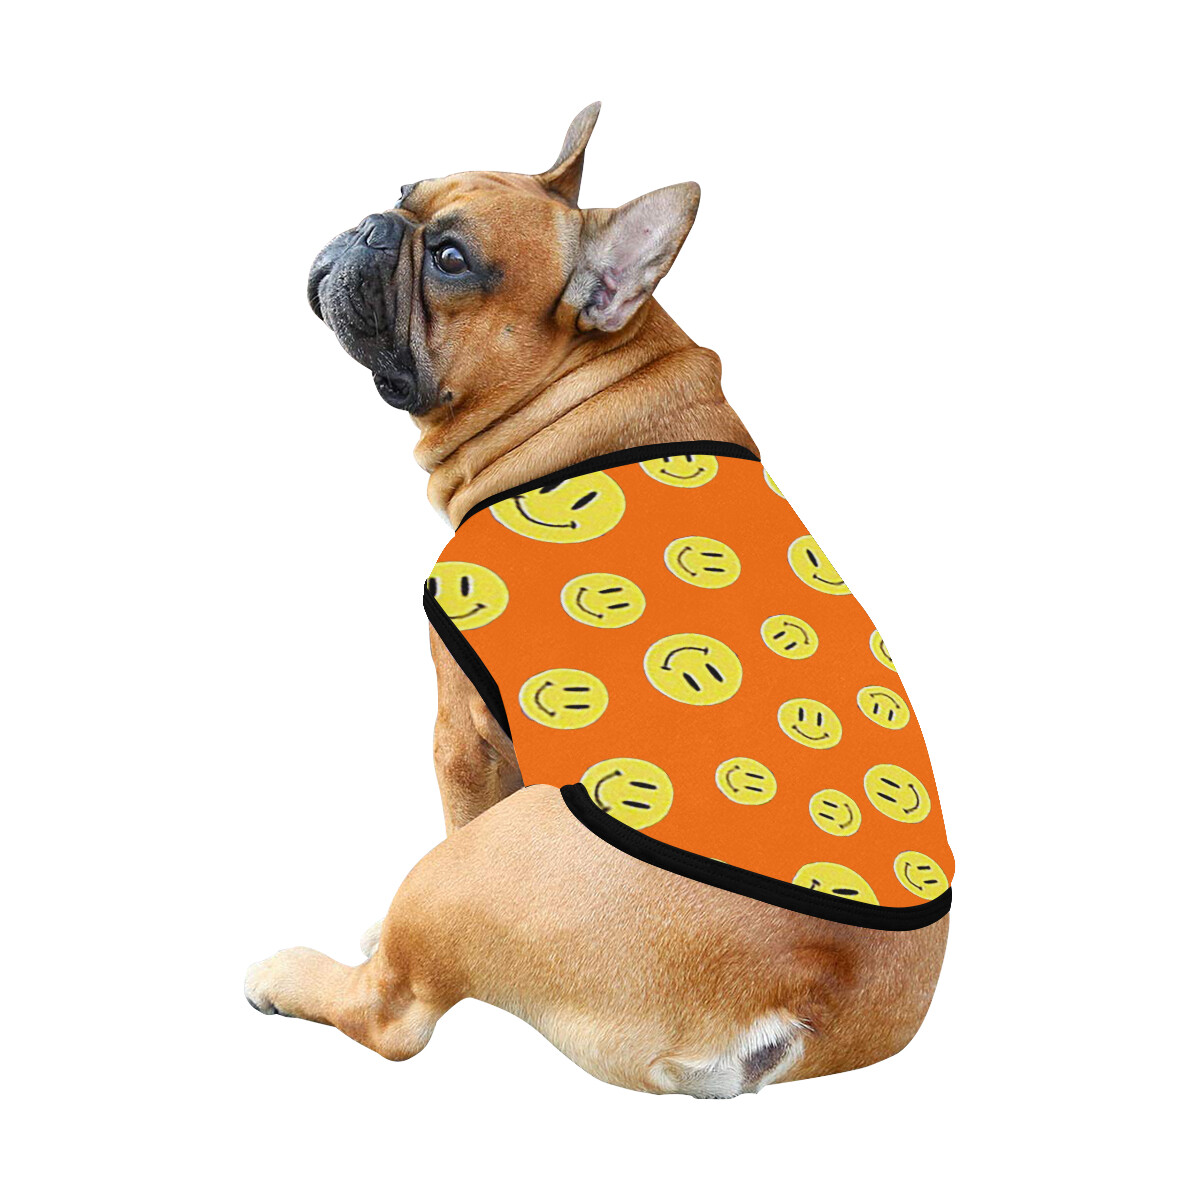 🐕 Happy faces Dog Tank Top, Dog shirt, Dog clothes, Gifts, front back print, 7 sizes XS to 3XL, dog t-shirt, dog t-shirt, dog gift, orange